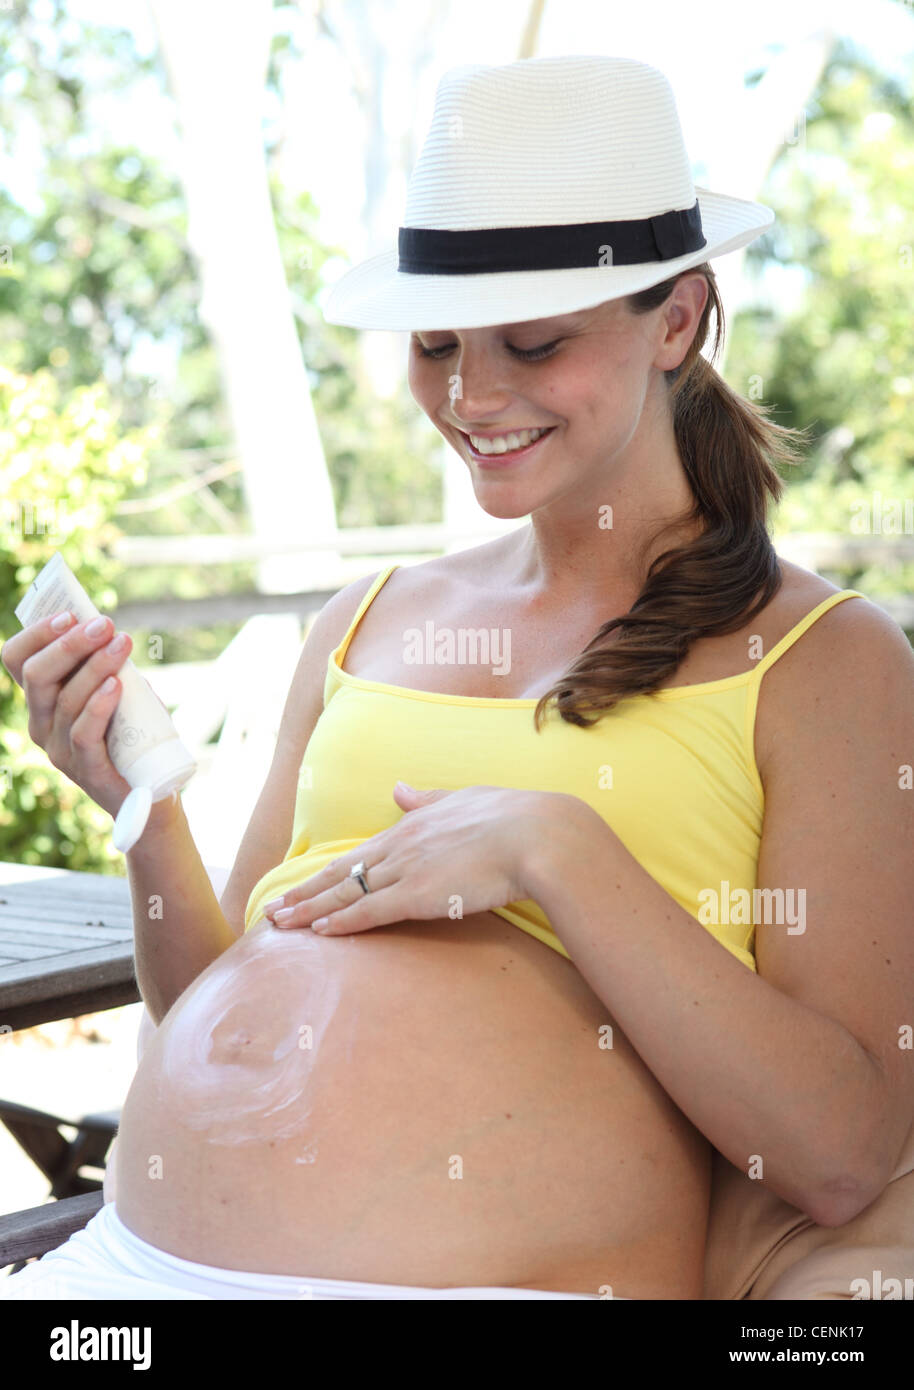 Female long brunette hair, wearing a white hat, white skirt and yellow vest, sitting on armchair, applying cream to her bump, Stock Photo